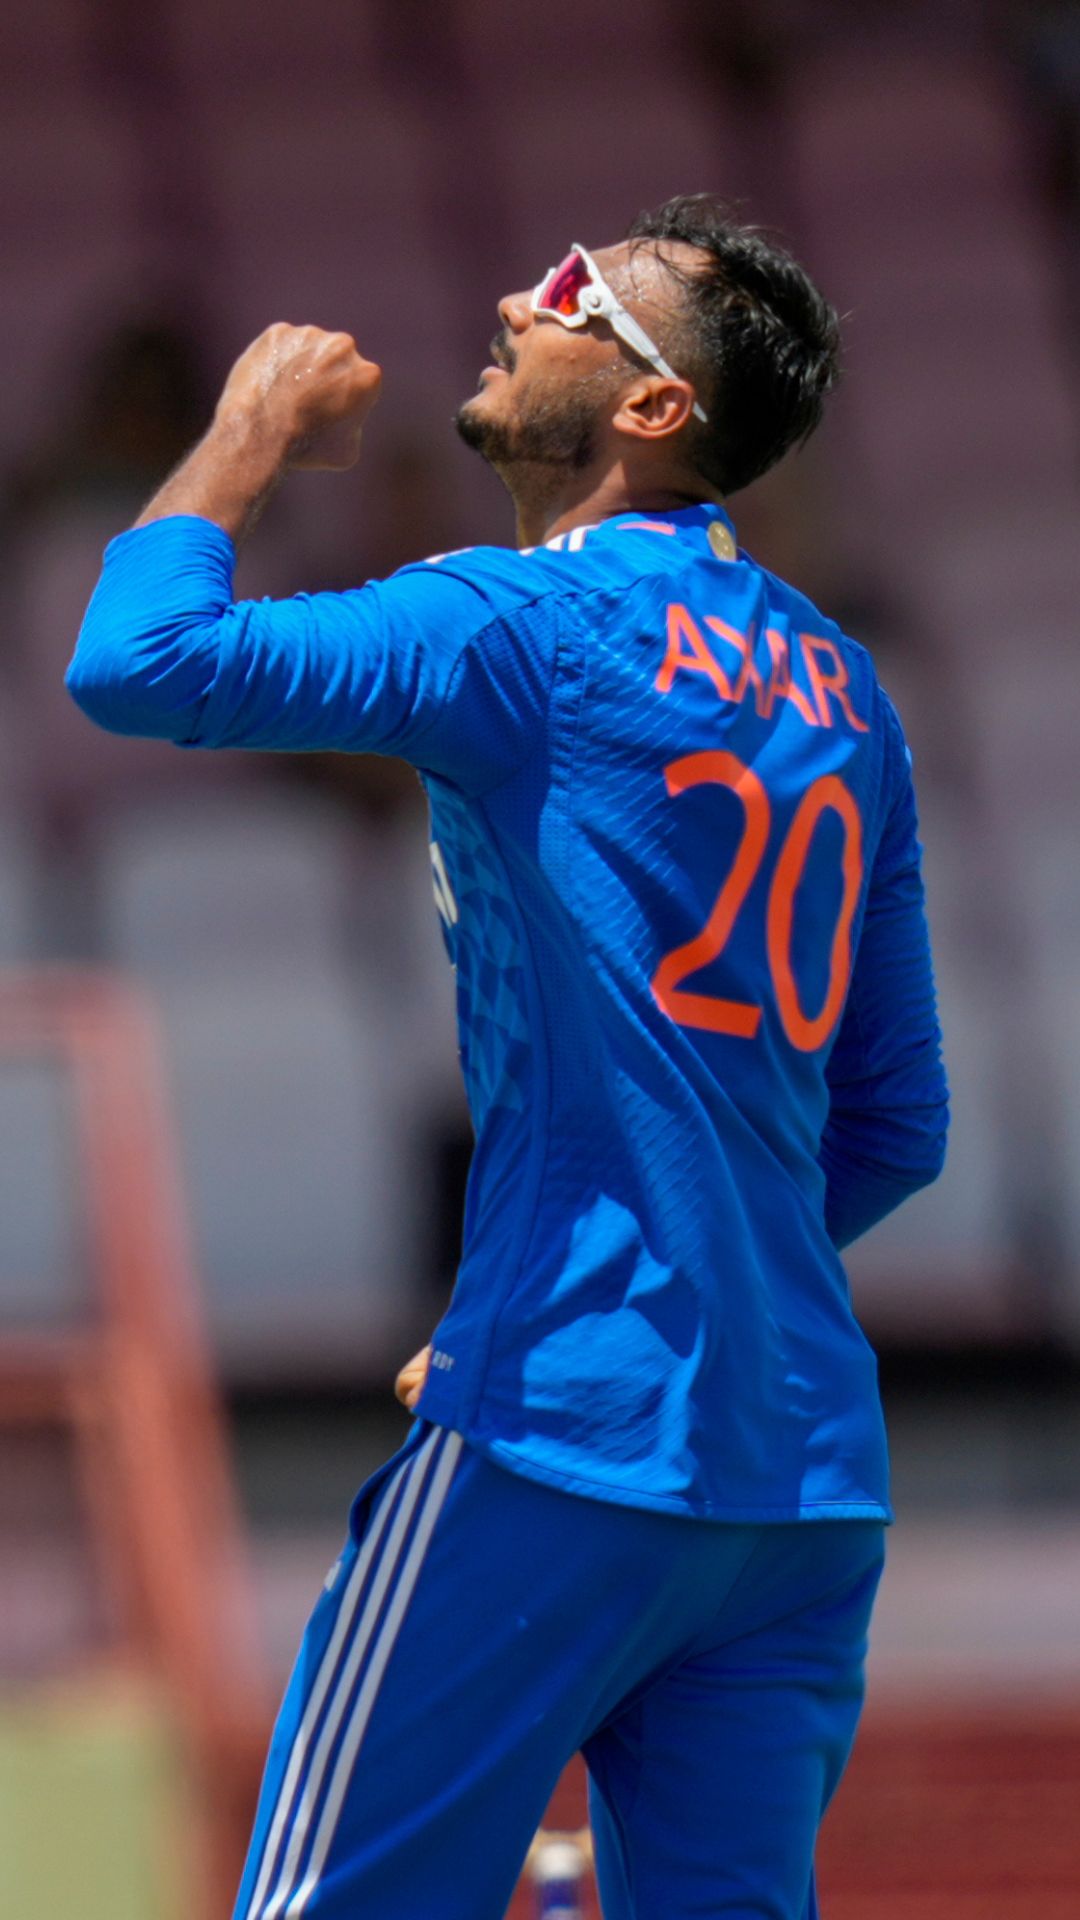 Indian bowlers to concede most runs in 1st over of T20I match, Axar Patel enters unwanted list